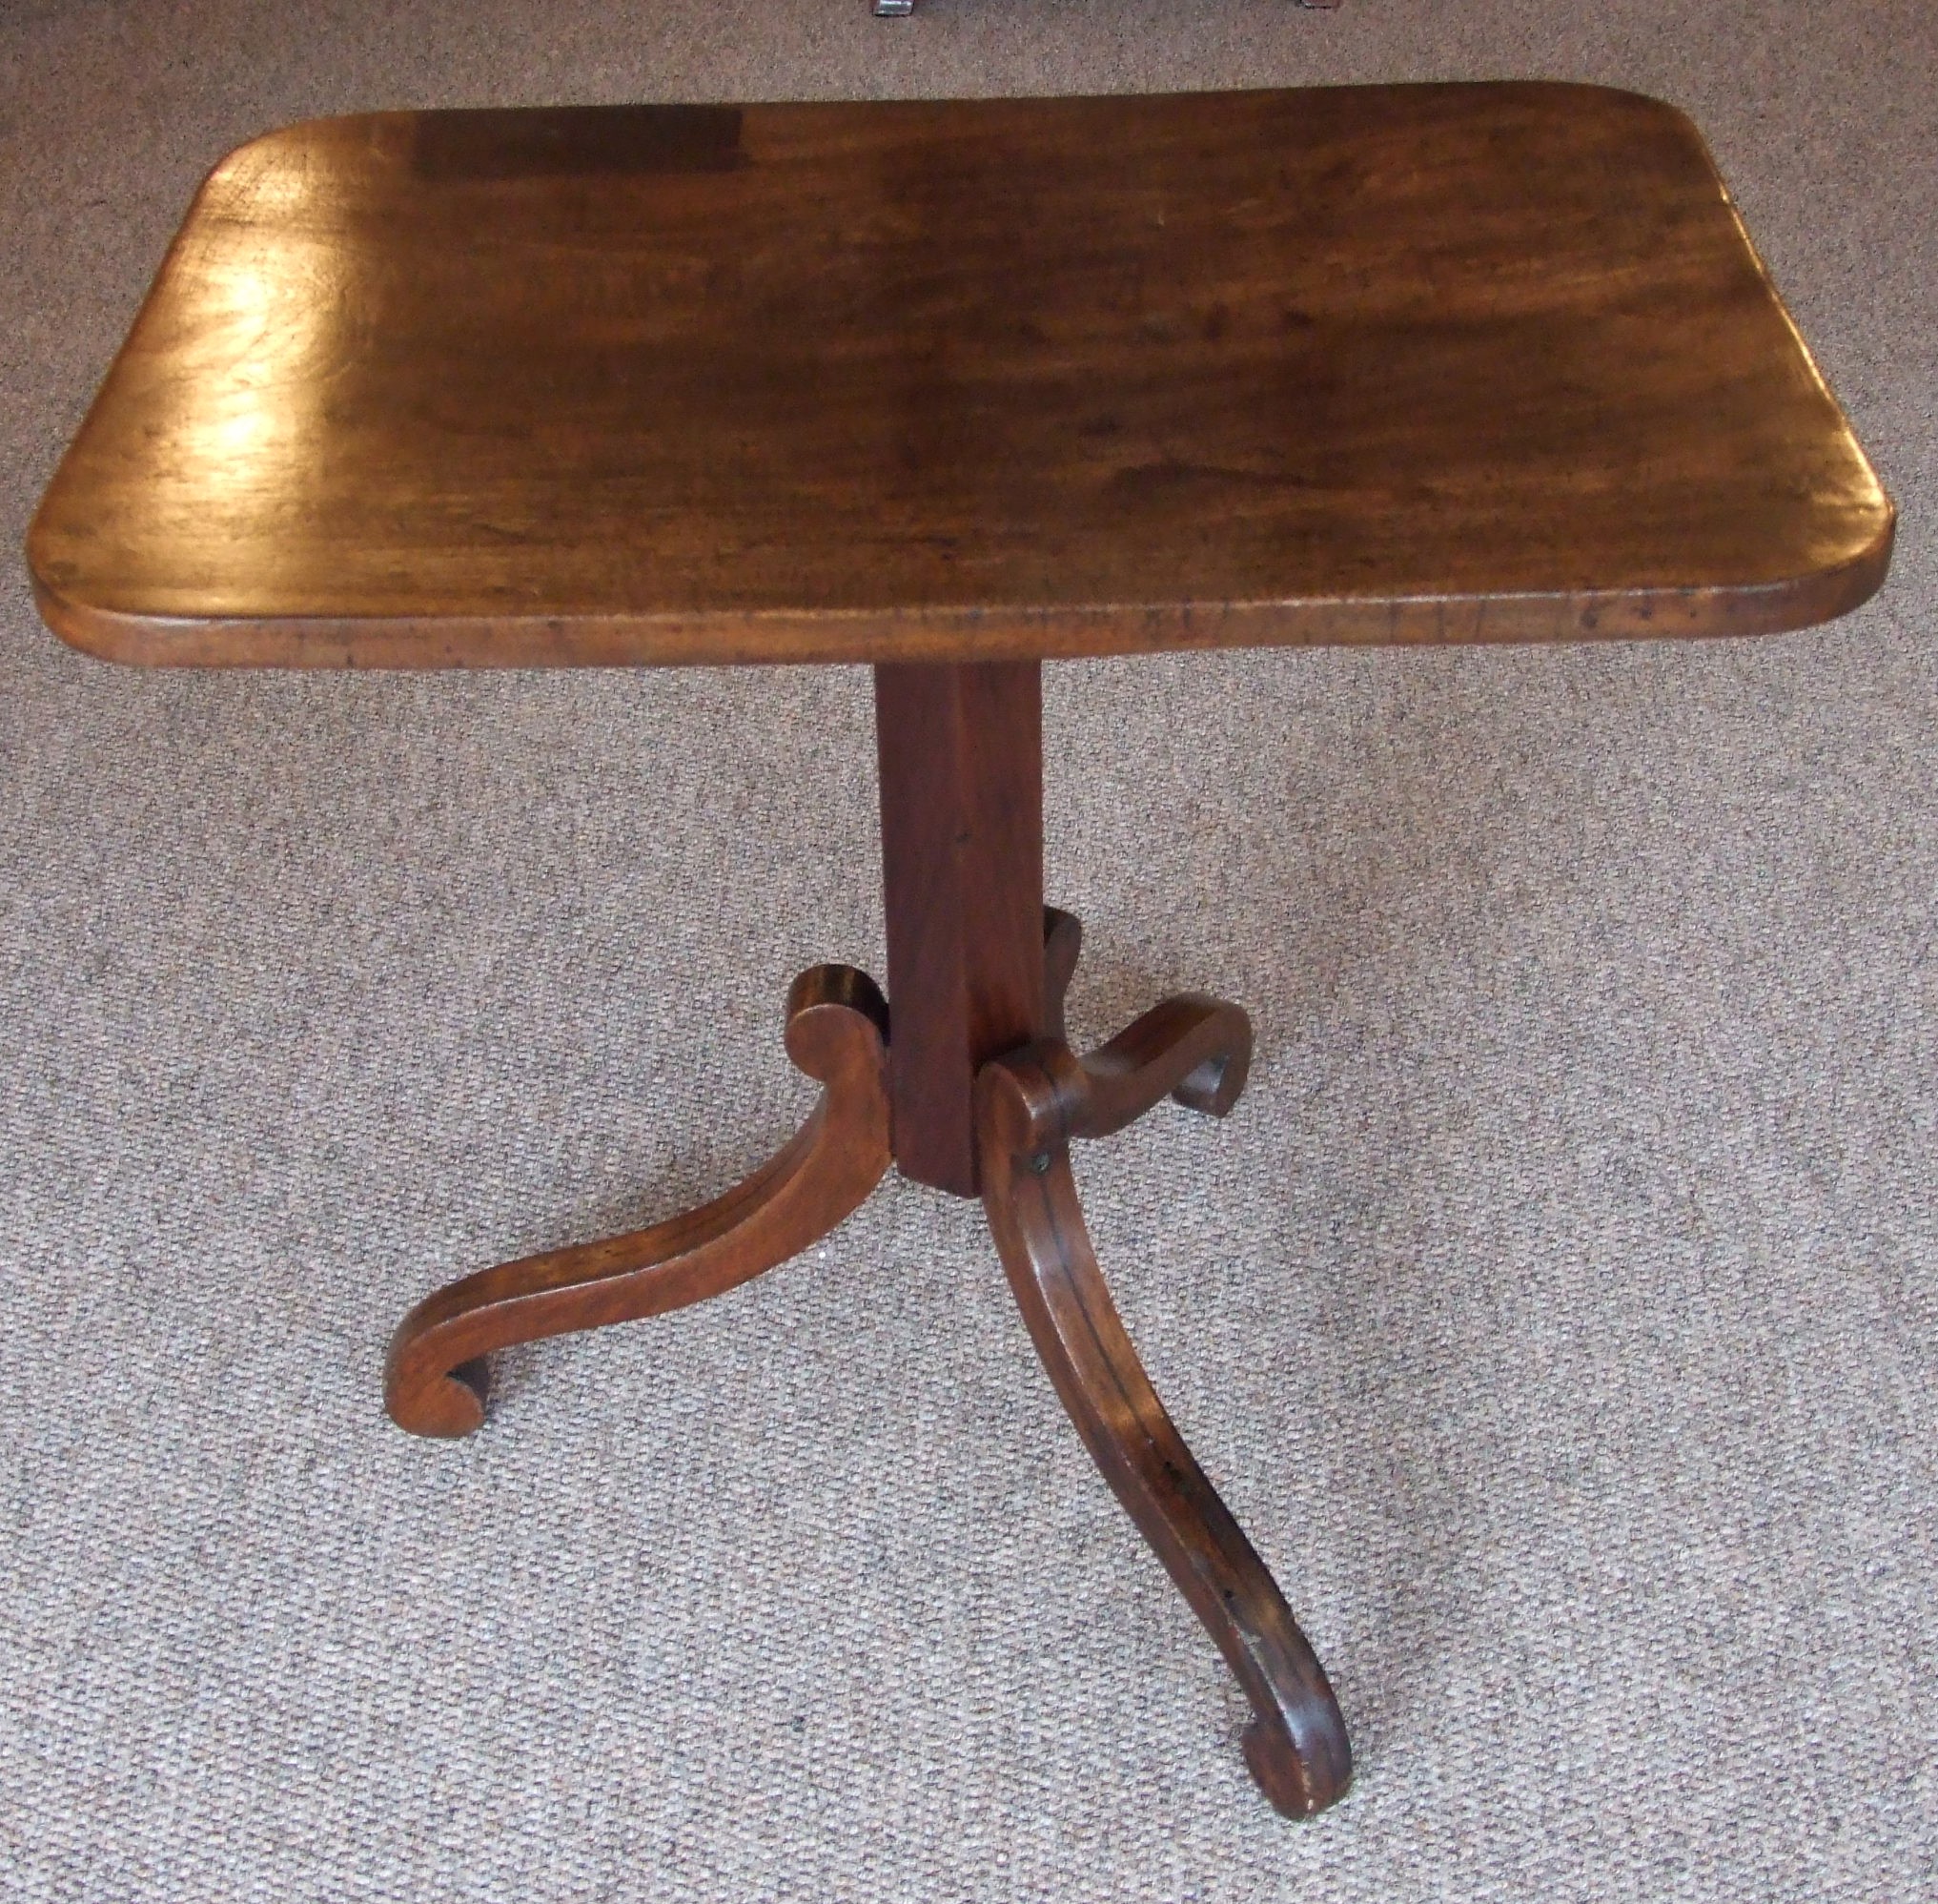 Mahogany Snap-top Occasional Table in Georgian Style, understood to be made of Wood from Lord